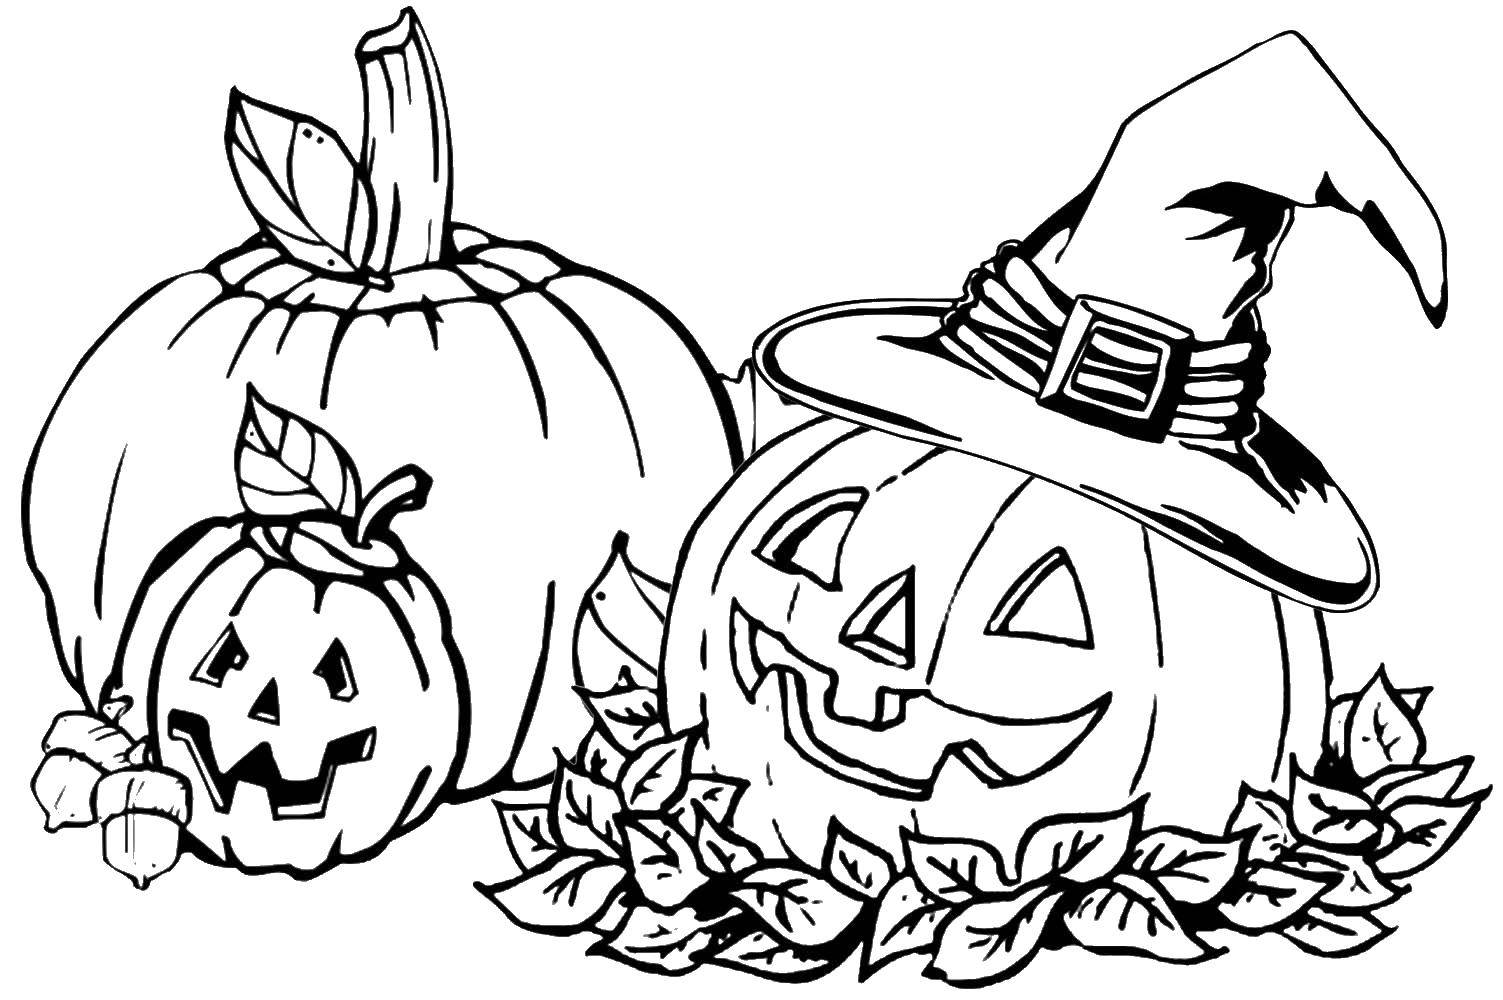 Coloring Pumpkin Halloween sheets. Category Autumn leaves falling. Tags:  Autumn, leaves.